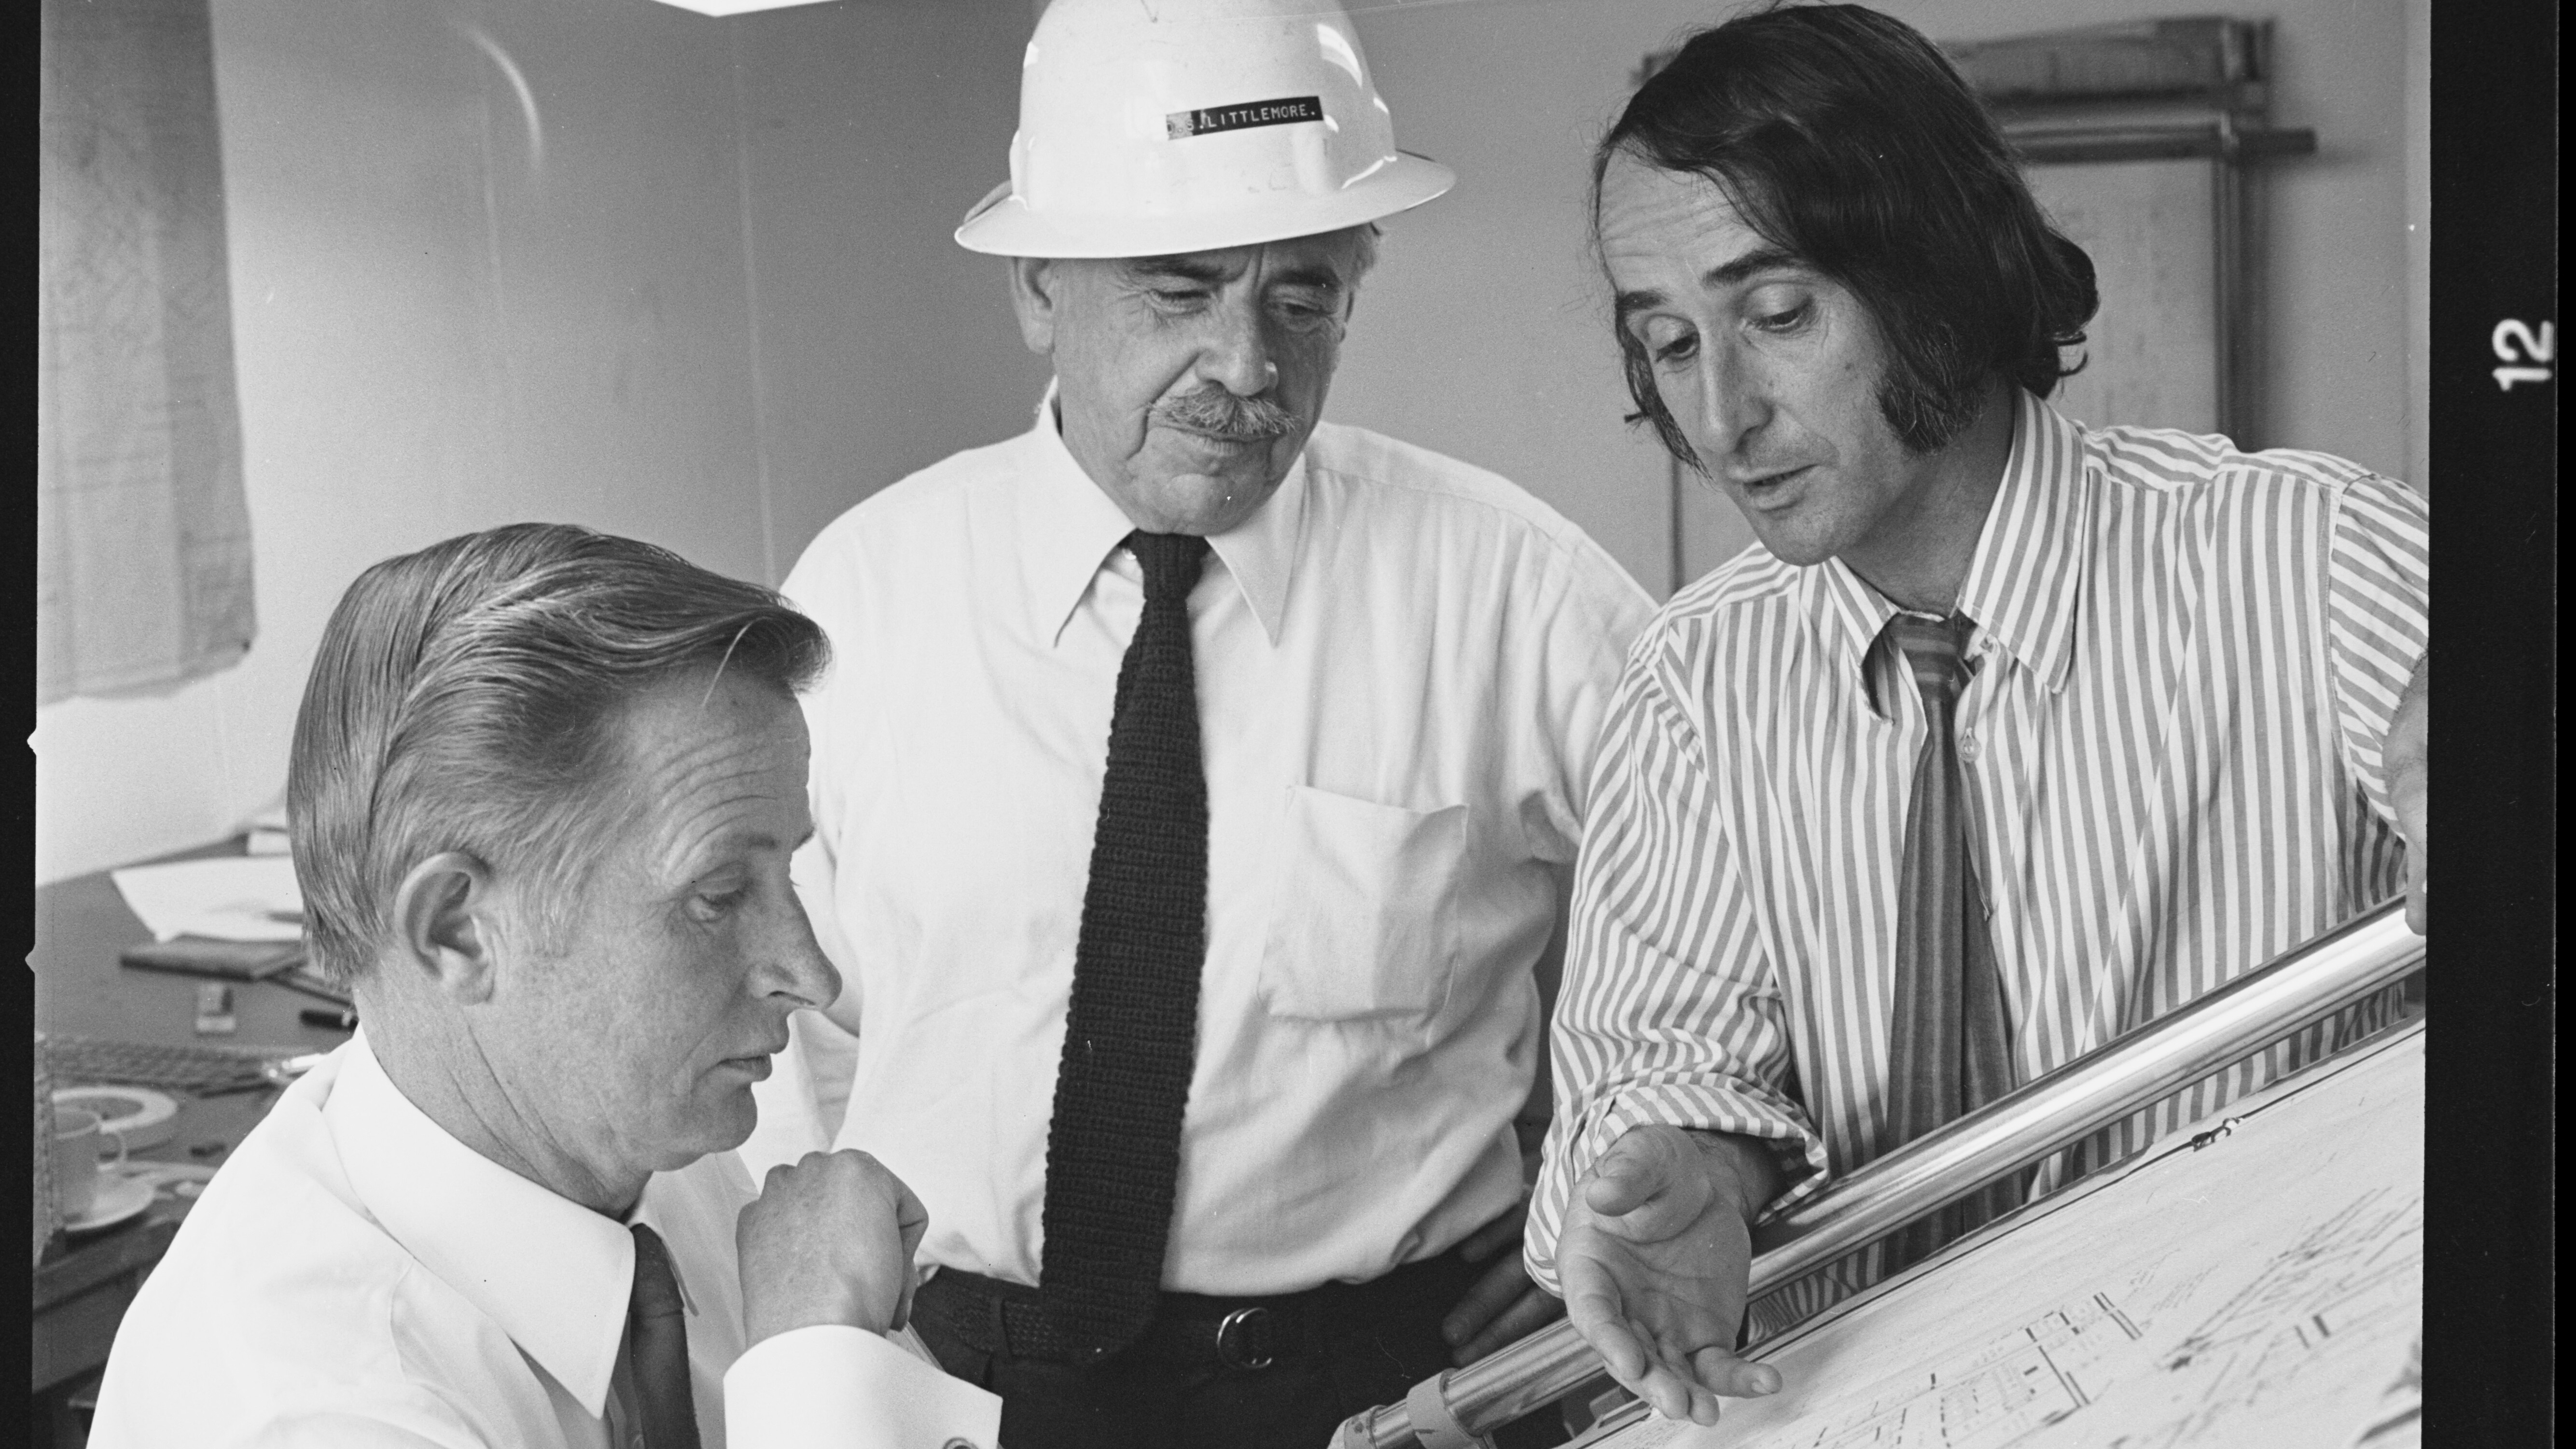 Peter Hall, David Littlemore and Lionel Todd discussing Opera House plans, May 1973, Max Dupain, Mitchell Library, State Library of New South Wales